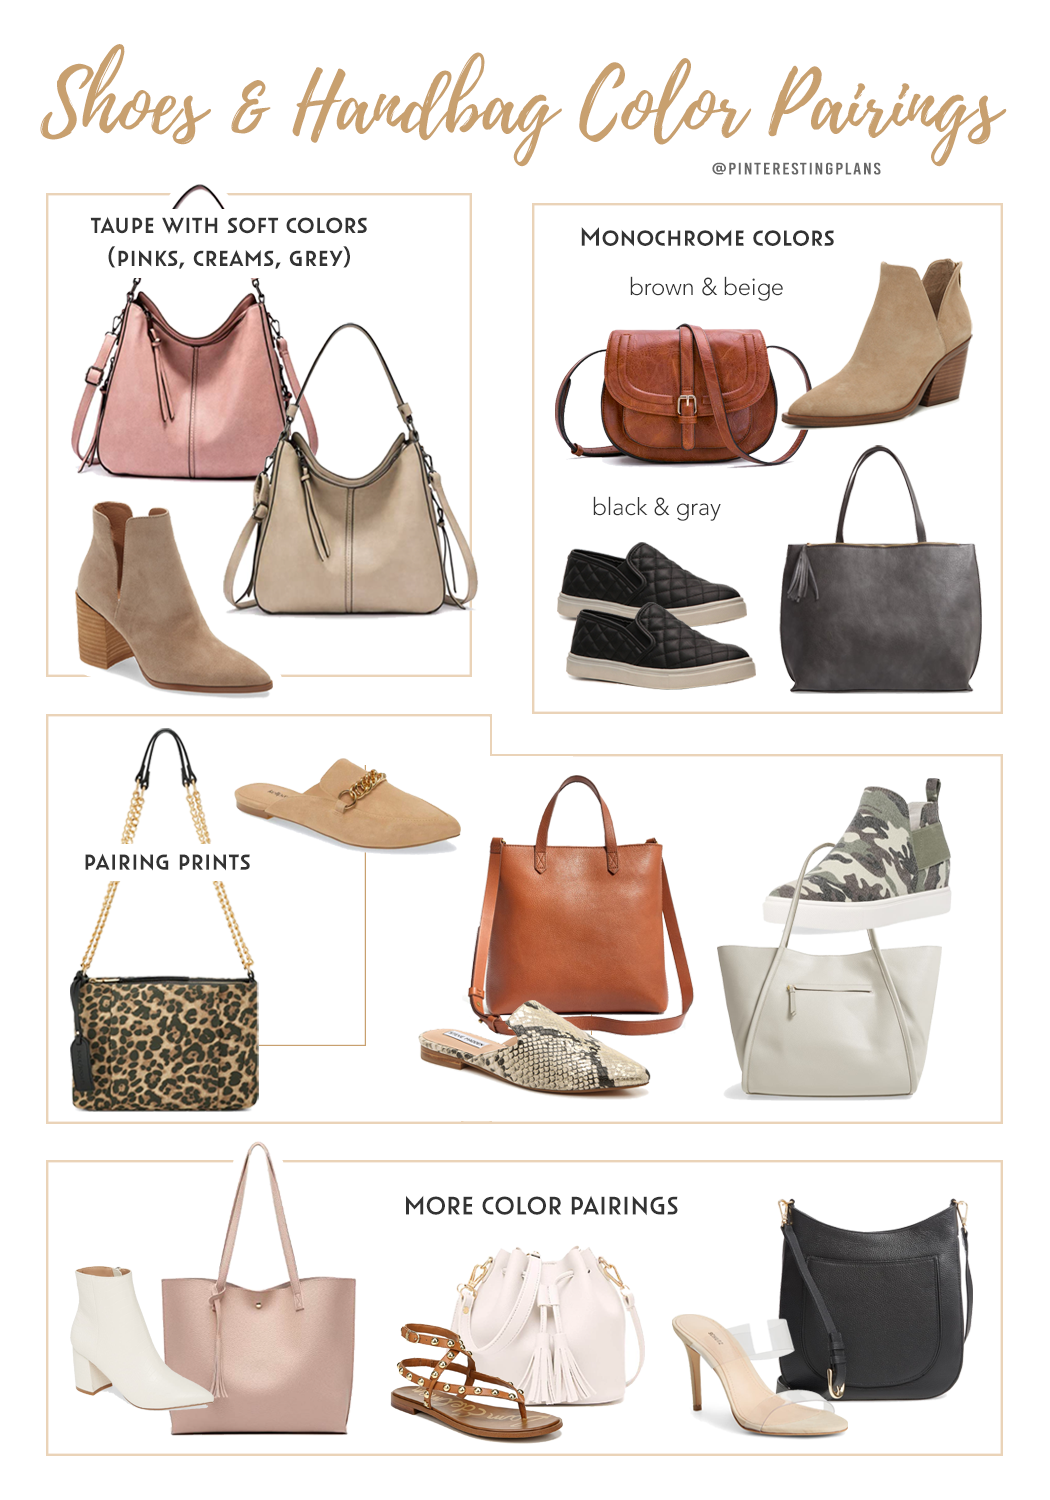 how to match your shoes and bag to your outfit on pinteresting plans blog